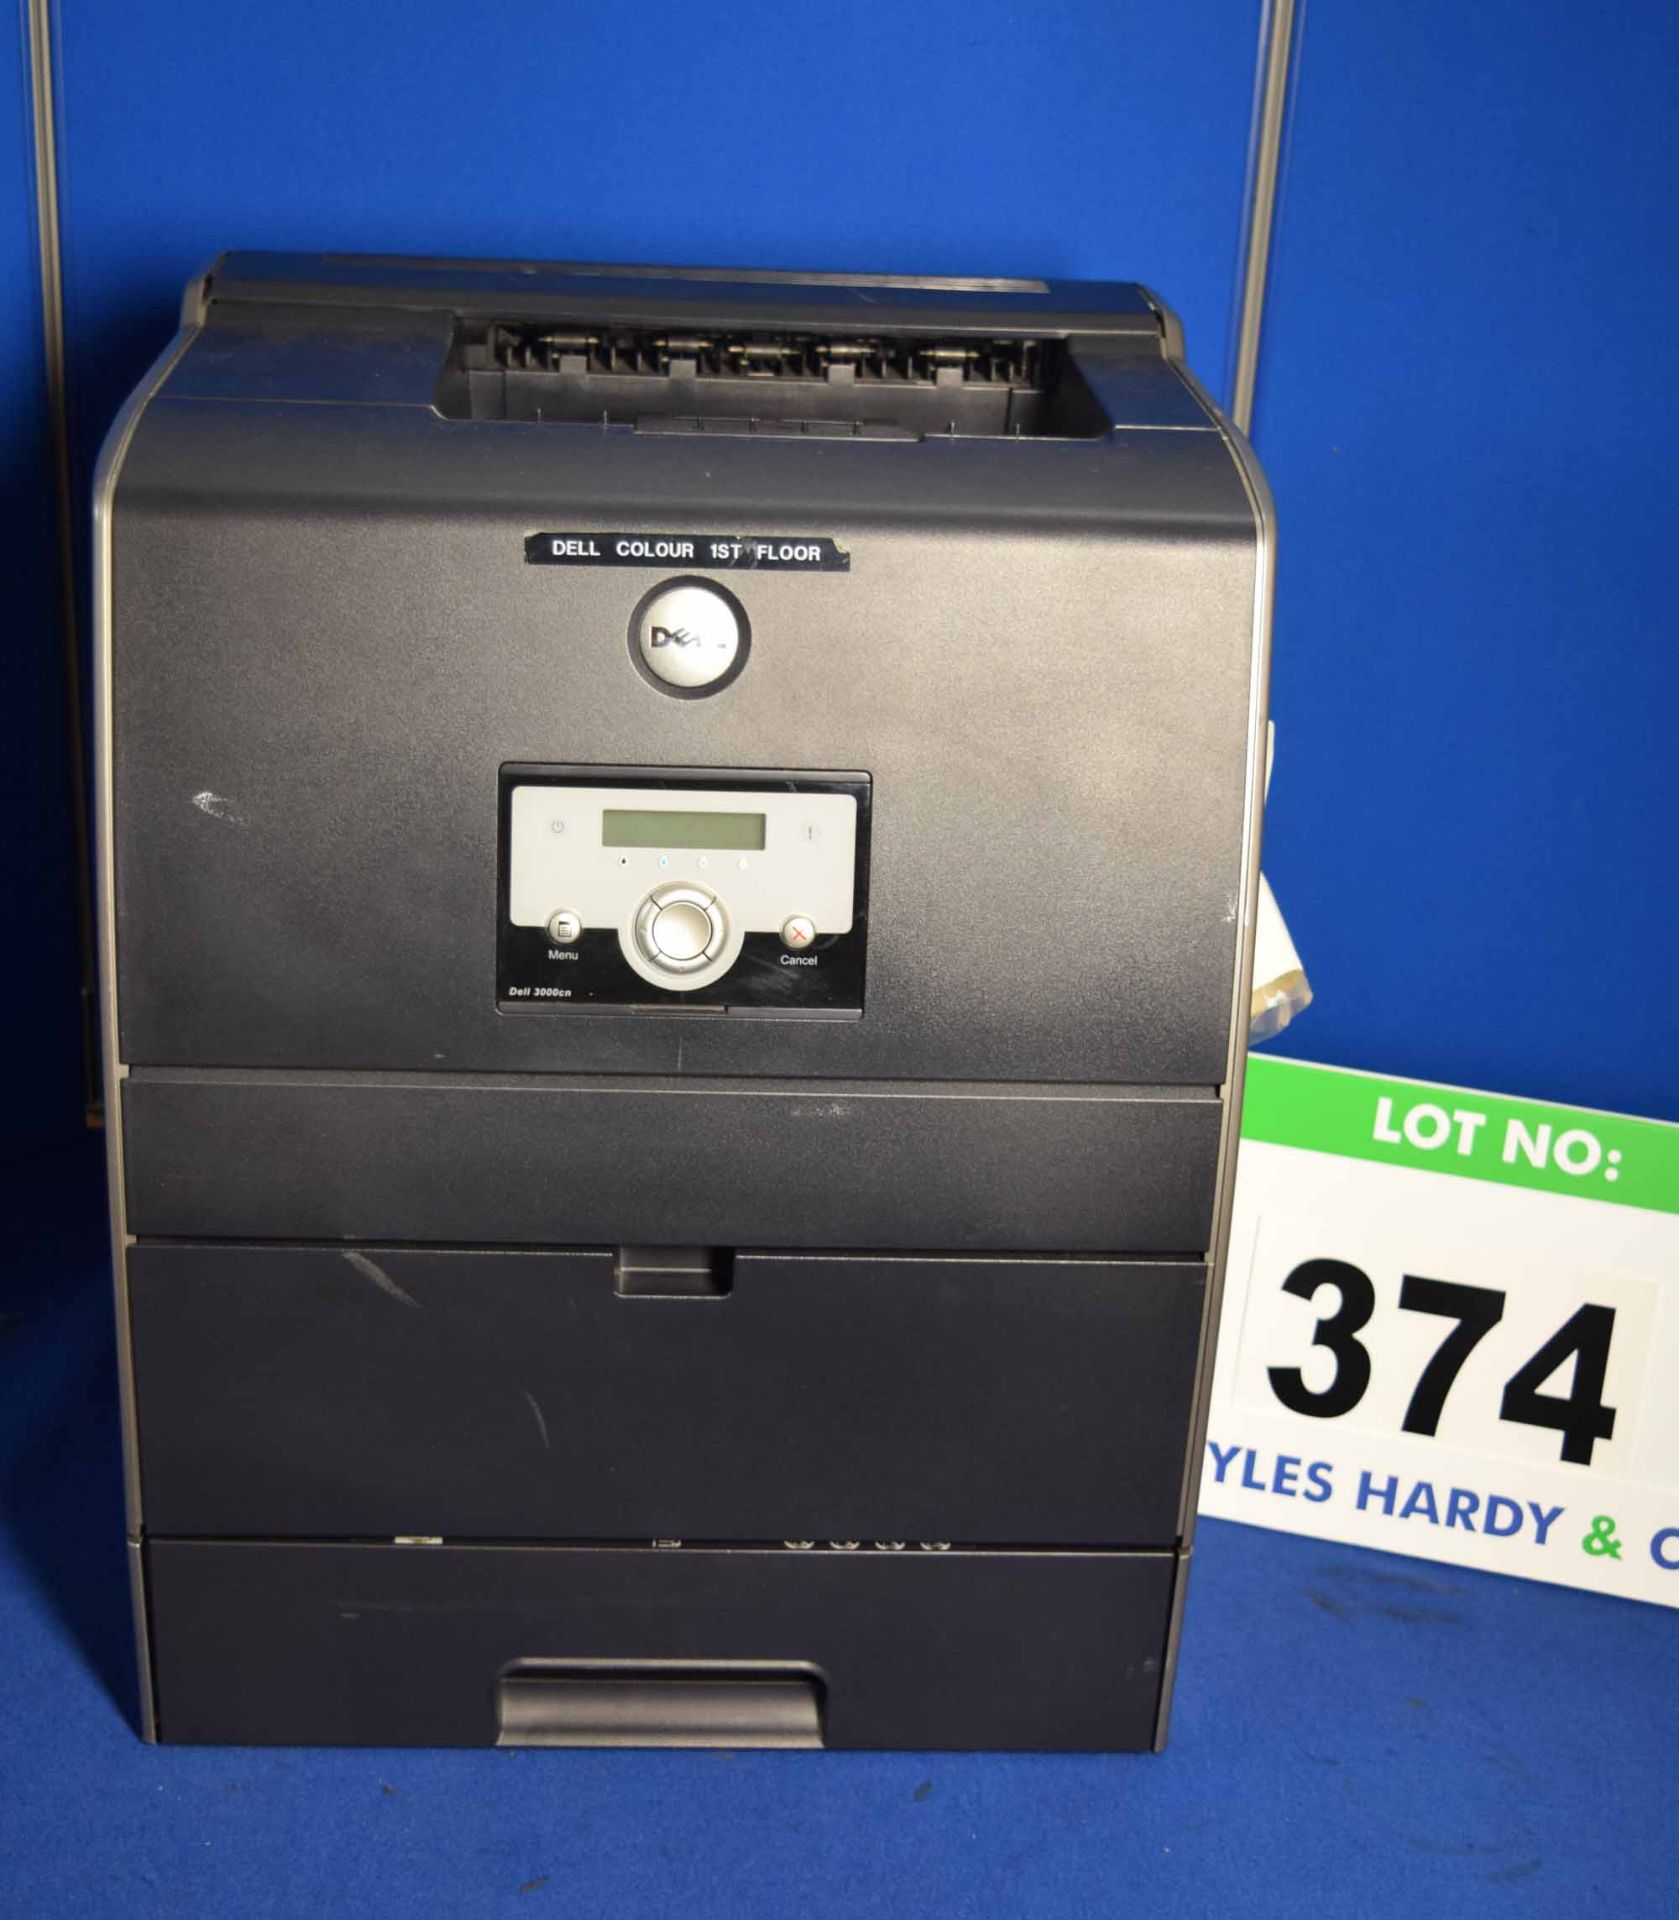 A DELL 3000CN A4 Colour Laser Printer with Twin Paper Trays